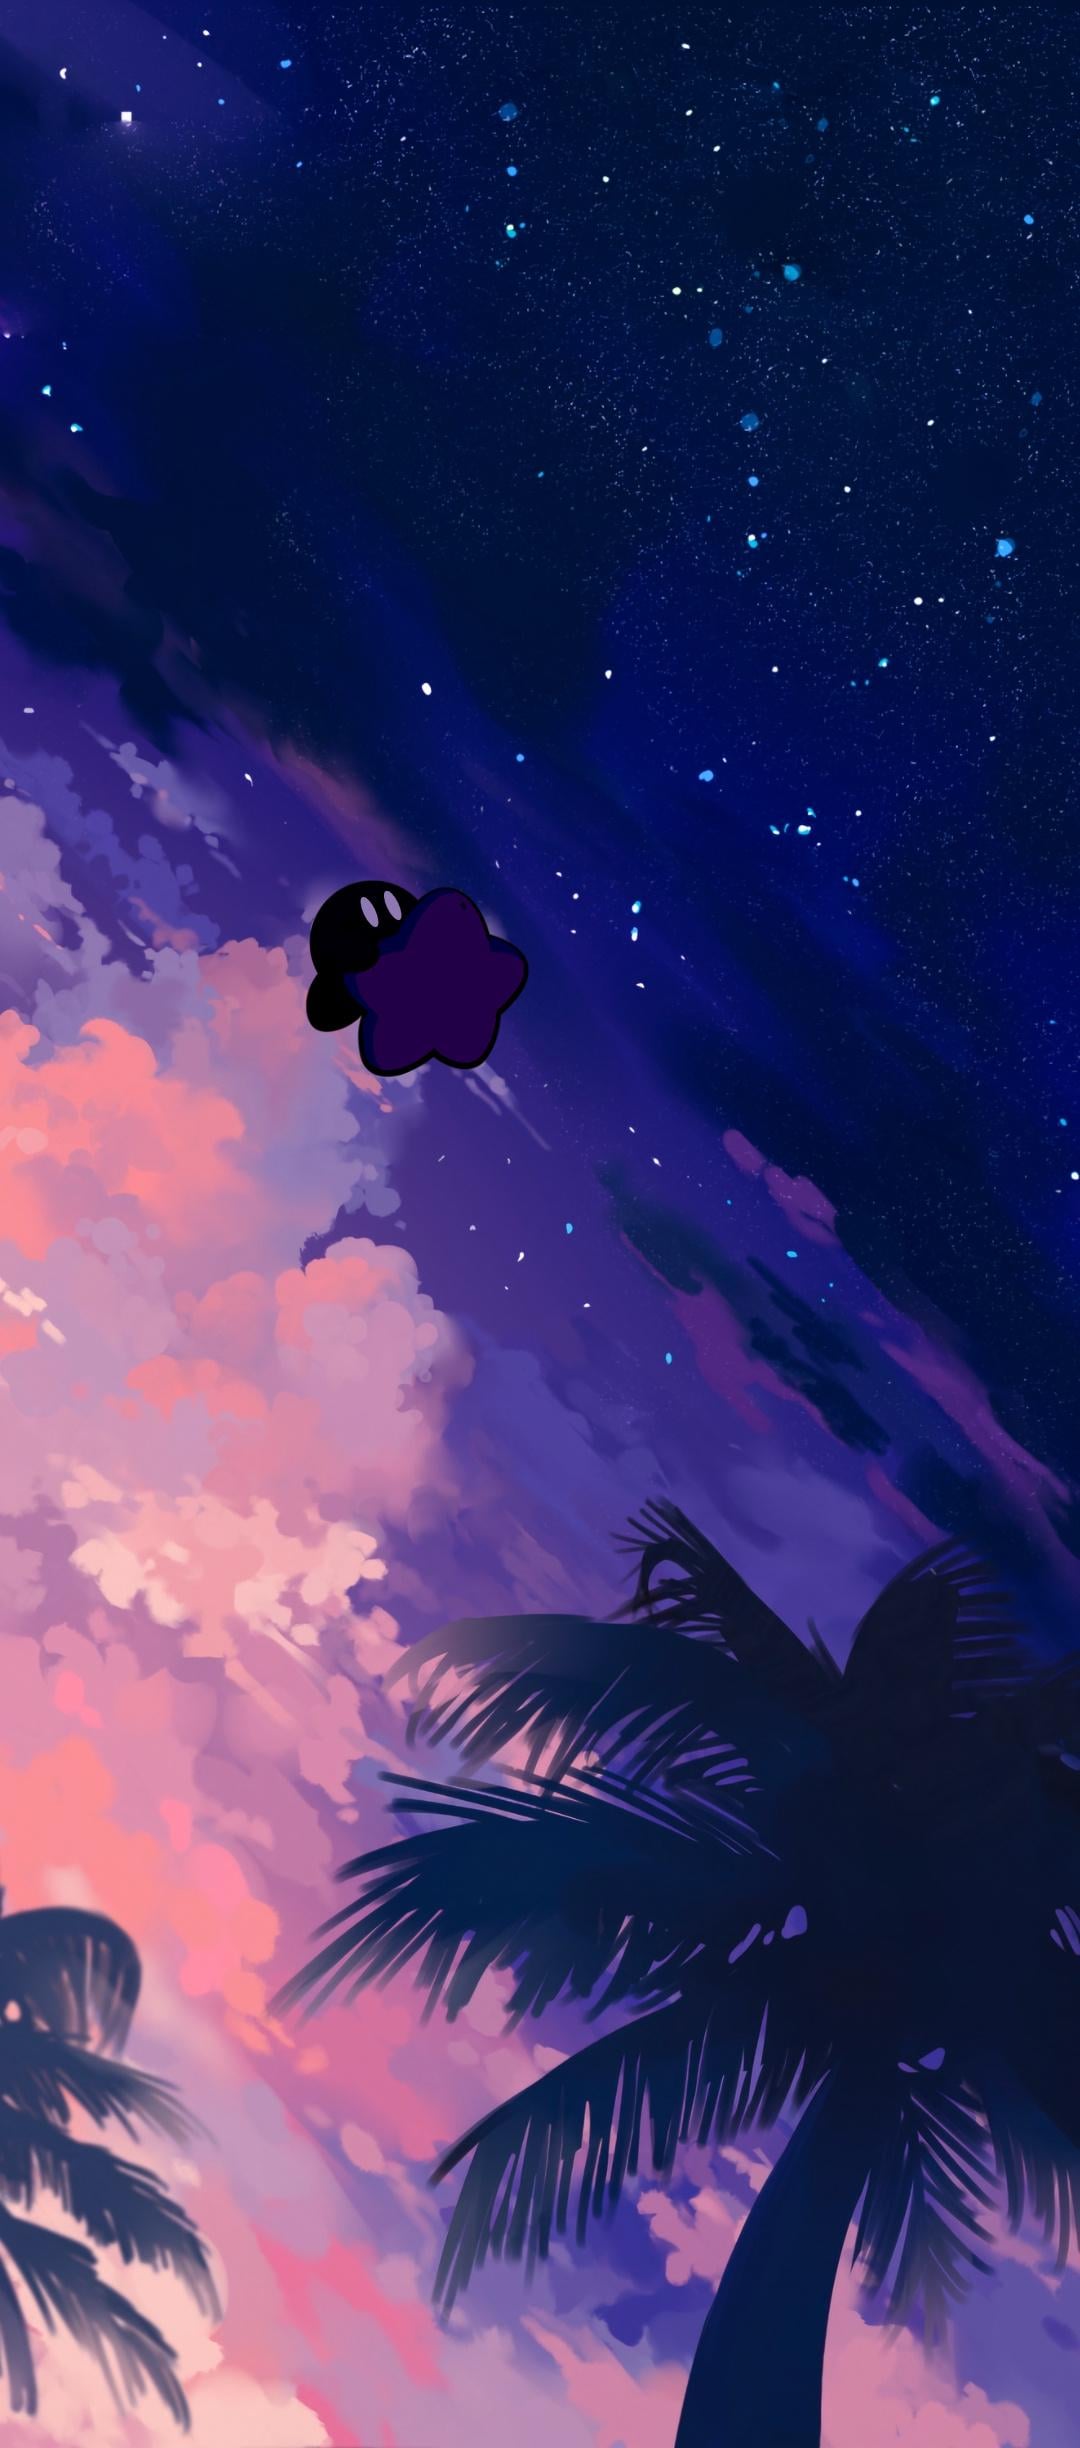 Send me your best Kirby wallpaper : r